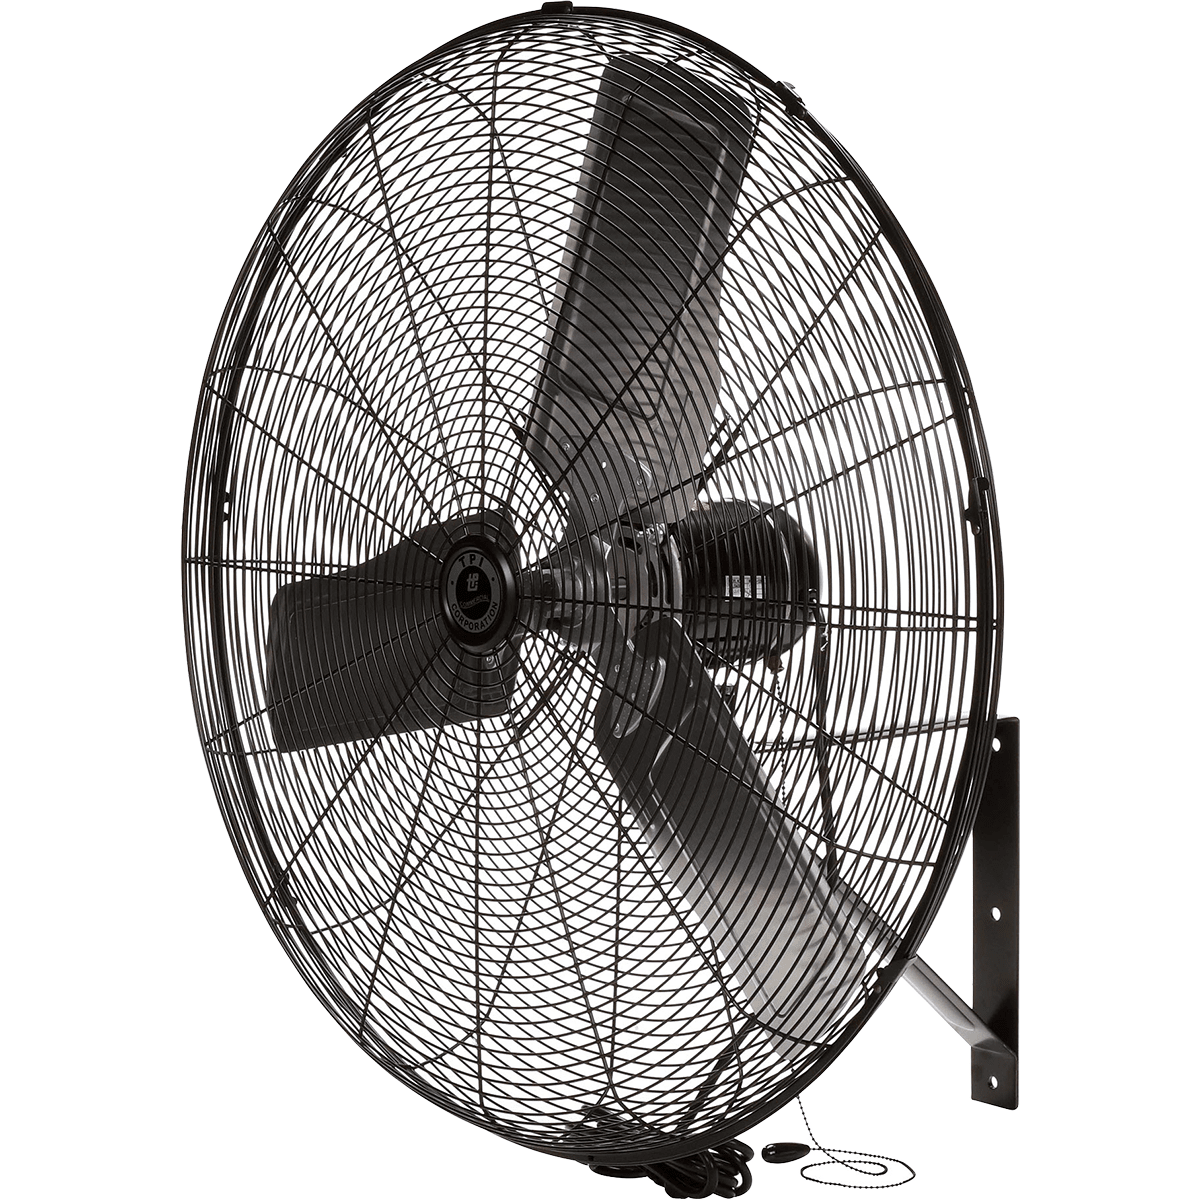 TPI CACU 3-Speed 1/4 HP Fixed Commercial Fan - 24-in. Wall Mount